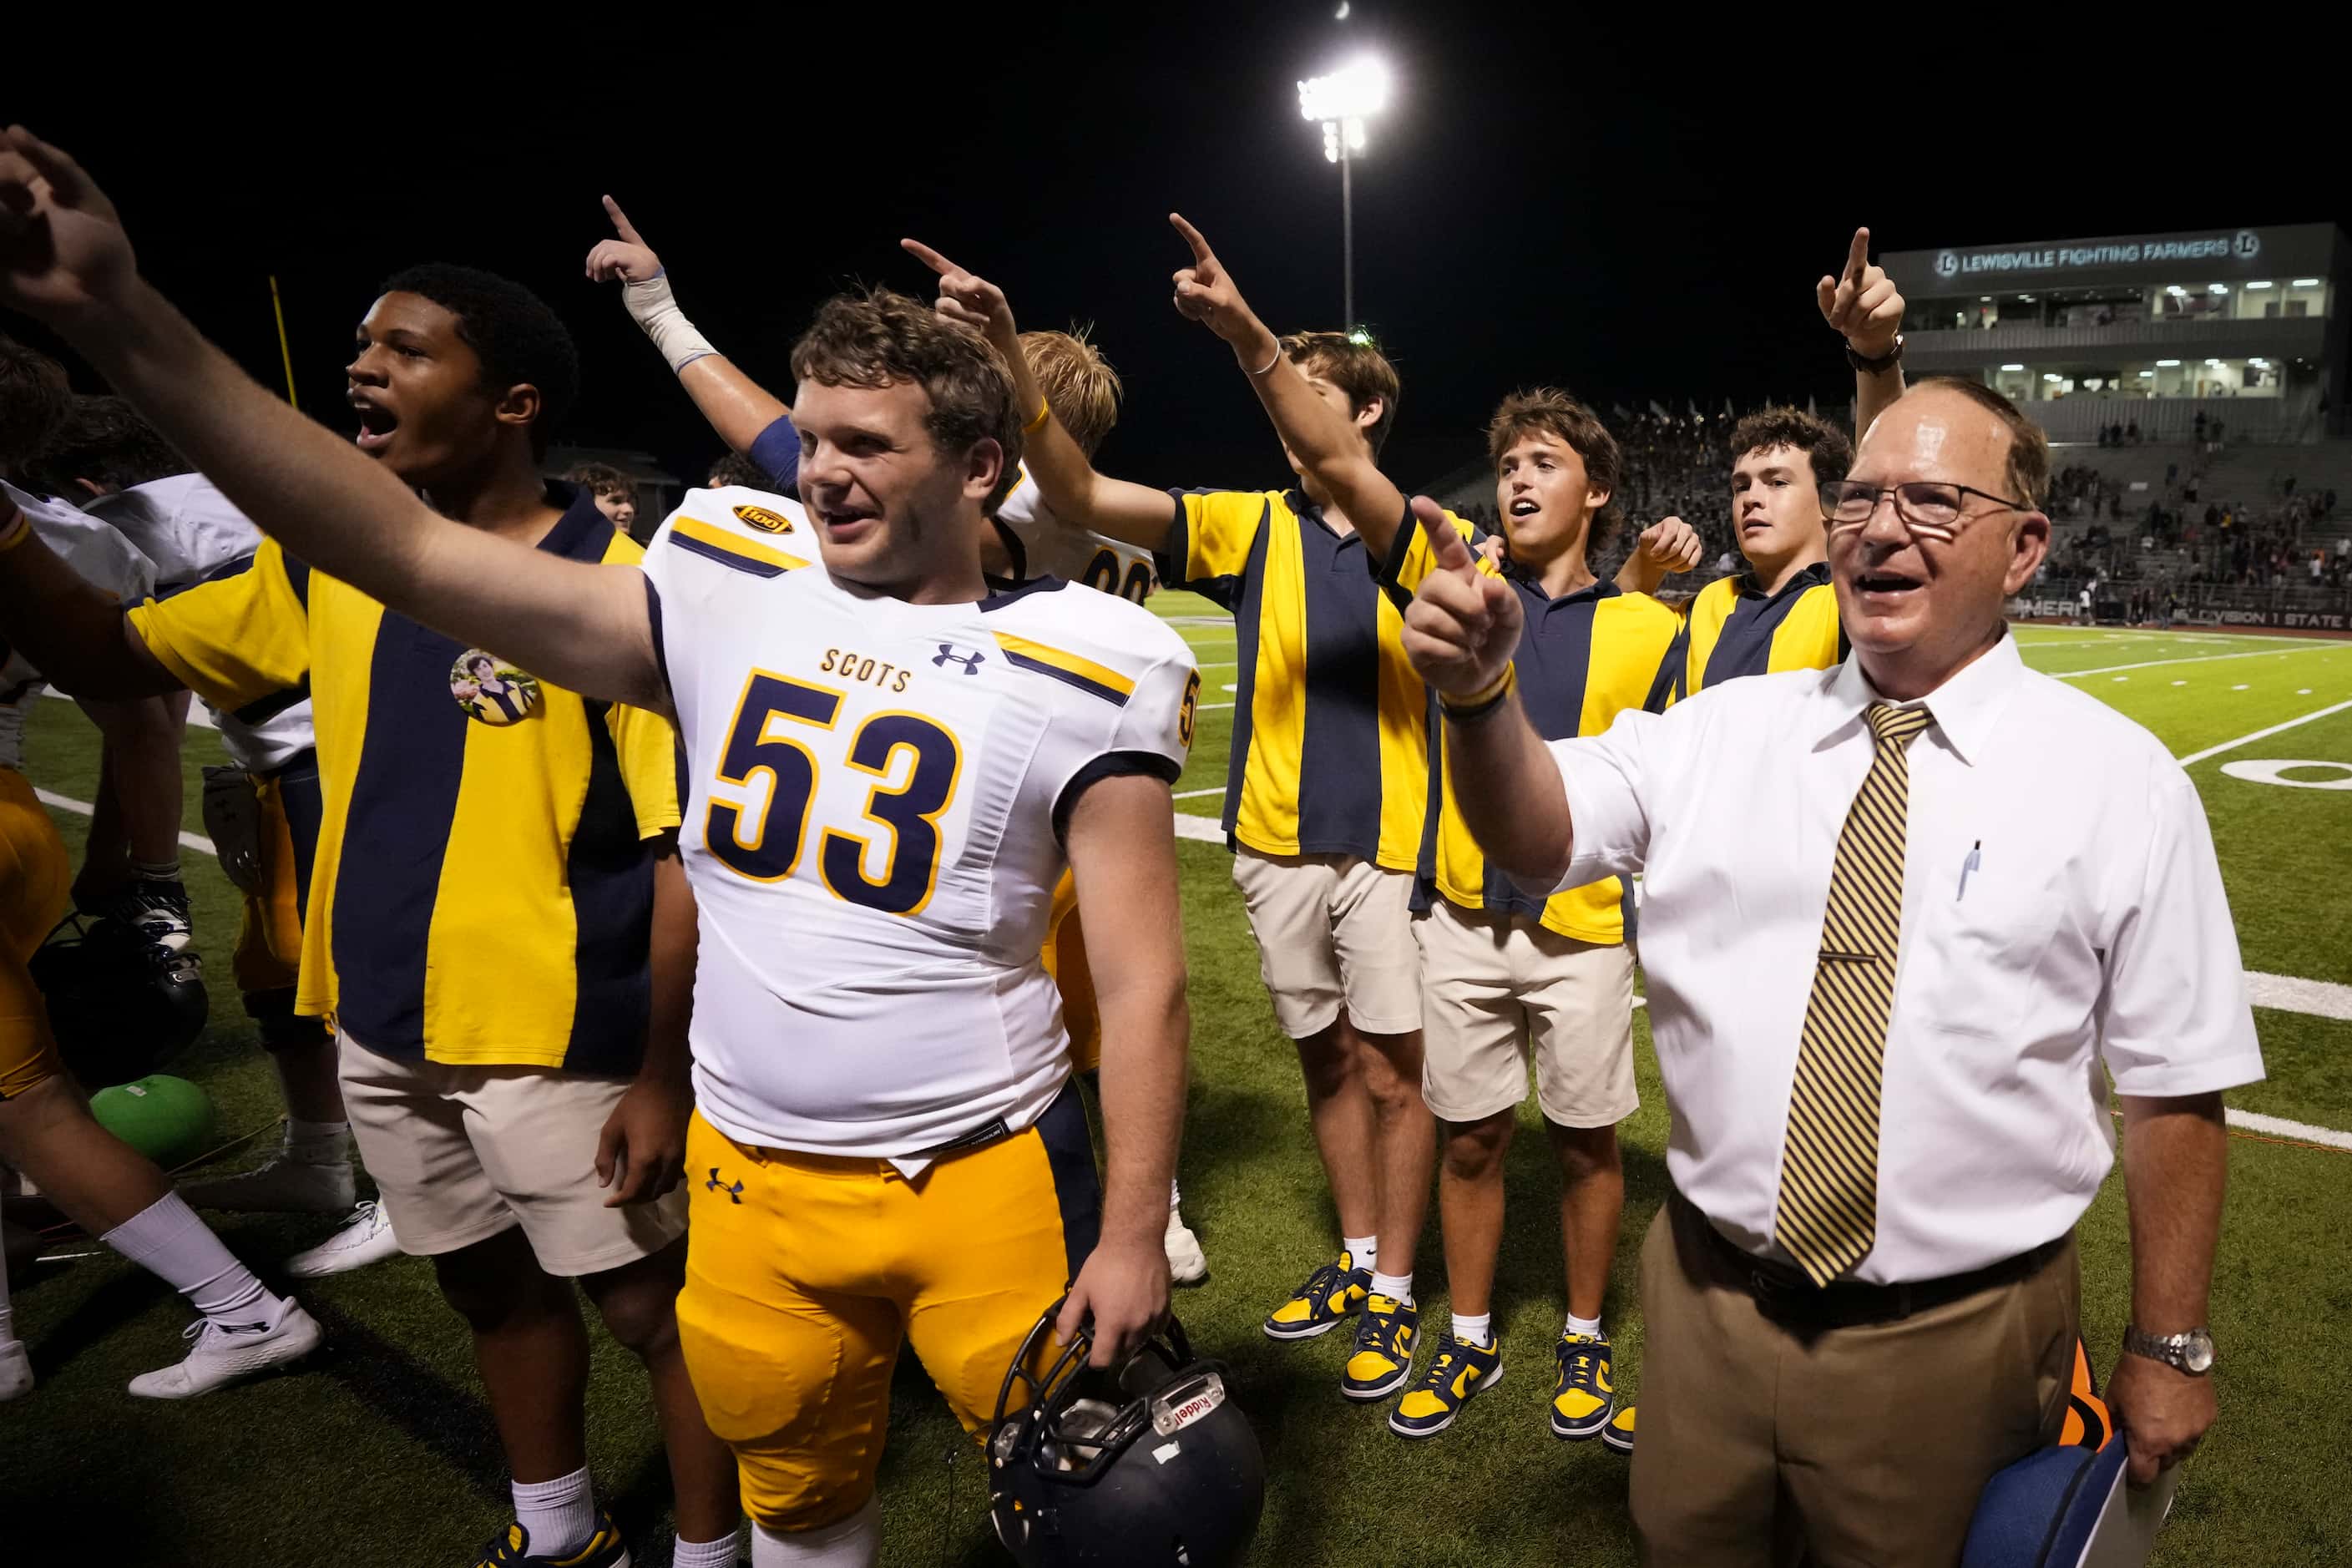 Highland Park head coach Randy Allen stands for the school song with offensive lineman Paul...